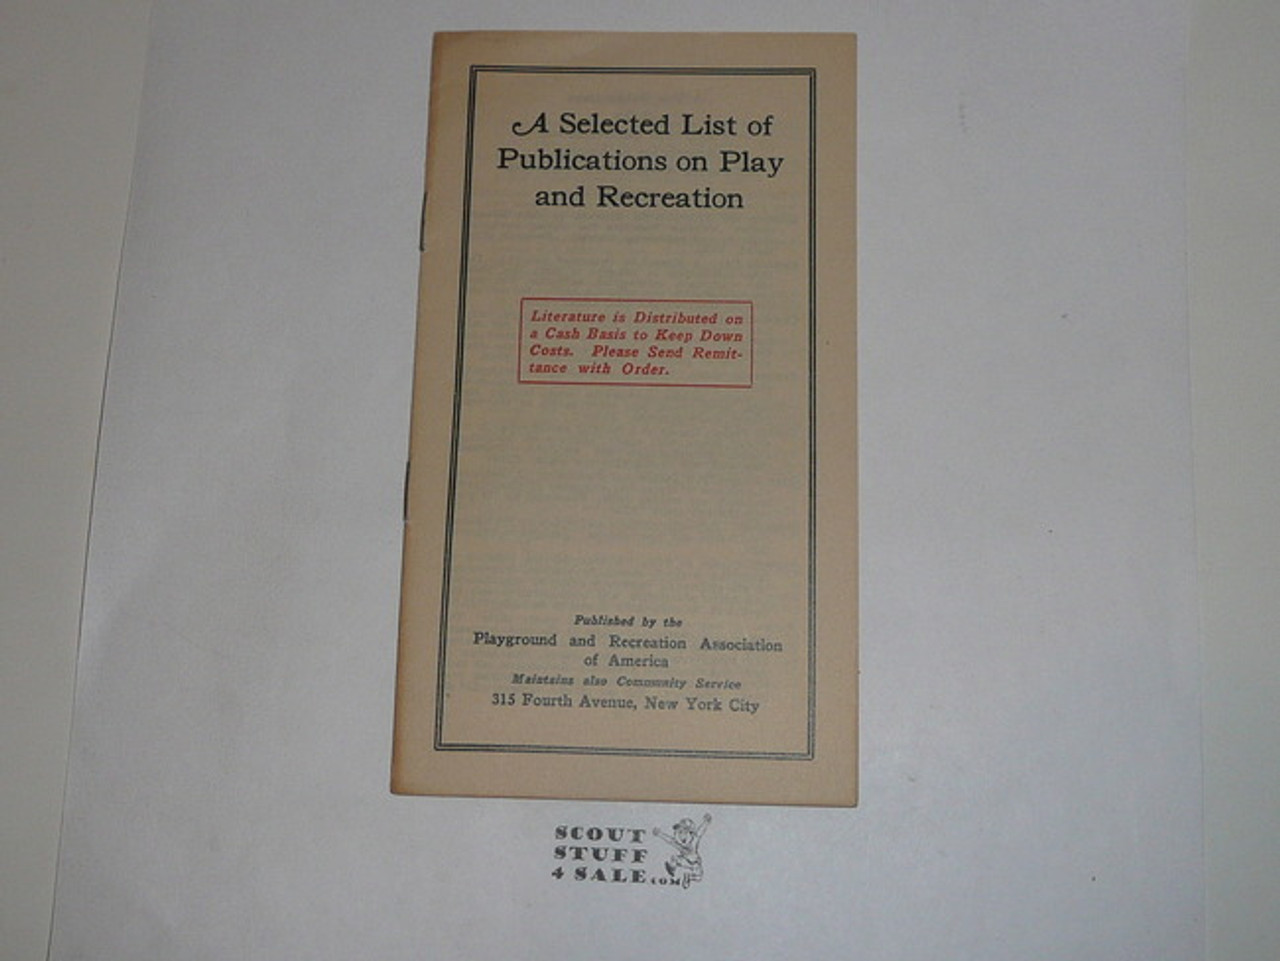 1940's A Selected List of Publications on Play and Recreation, by Playground and Recreation Association of America